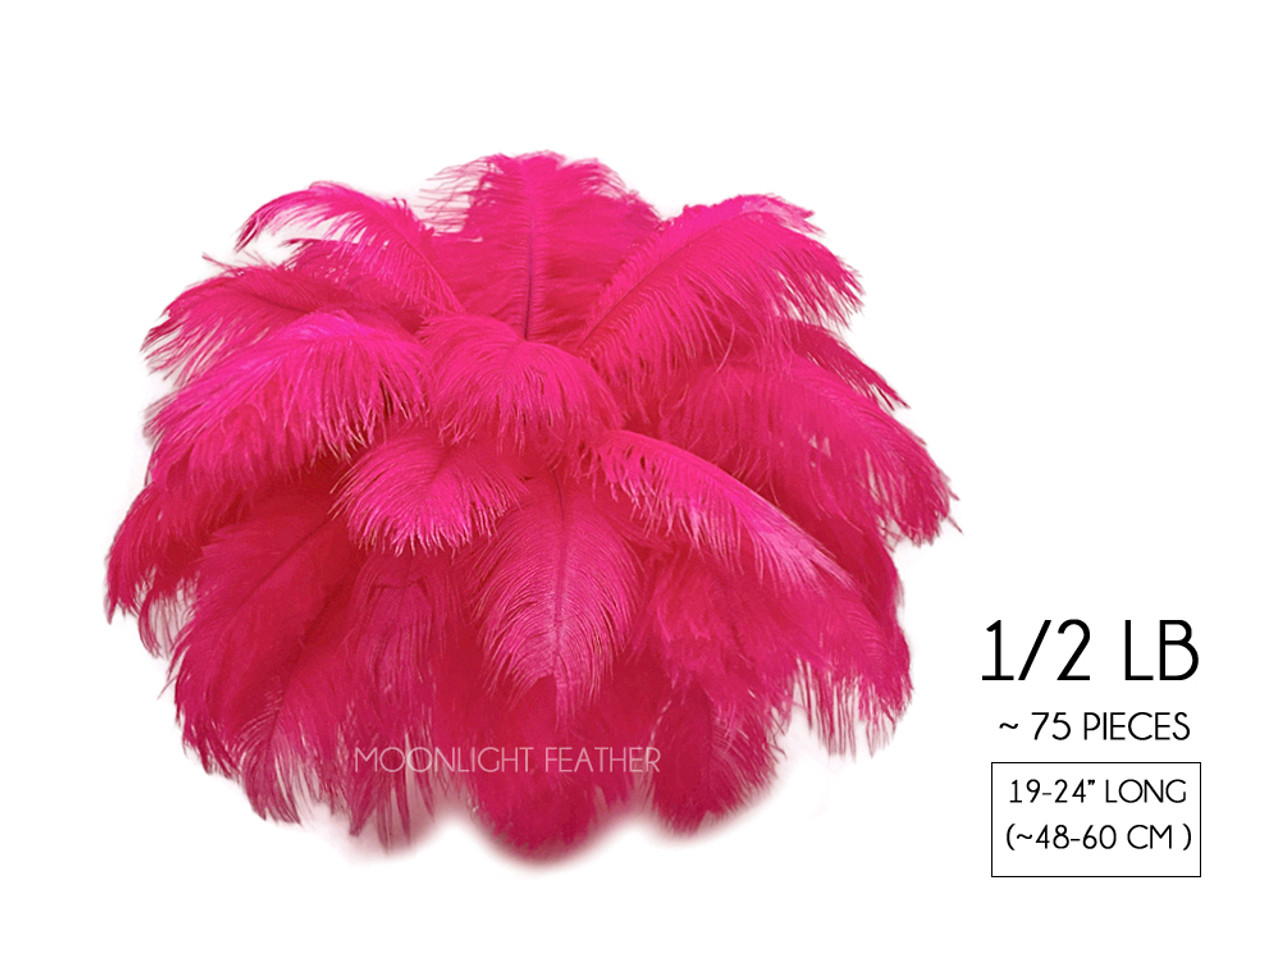 5 Pc Blush Pink Peach Ostrich Feathers 18-20 inches Instagram Popular  Colors!